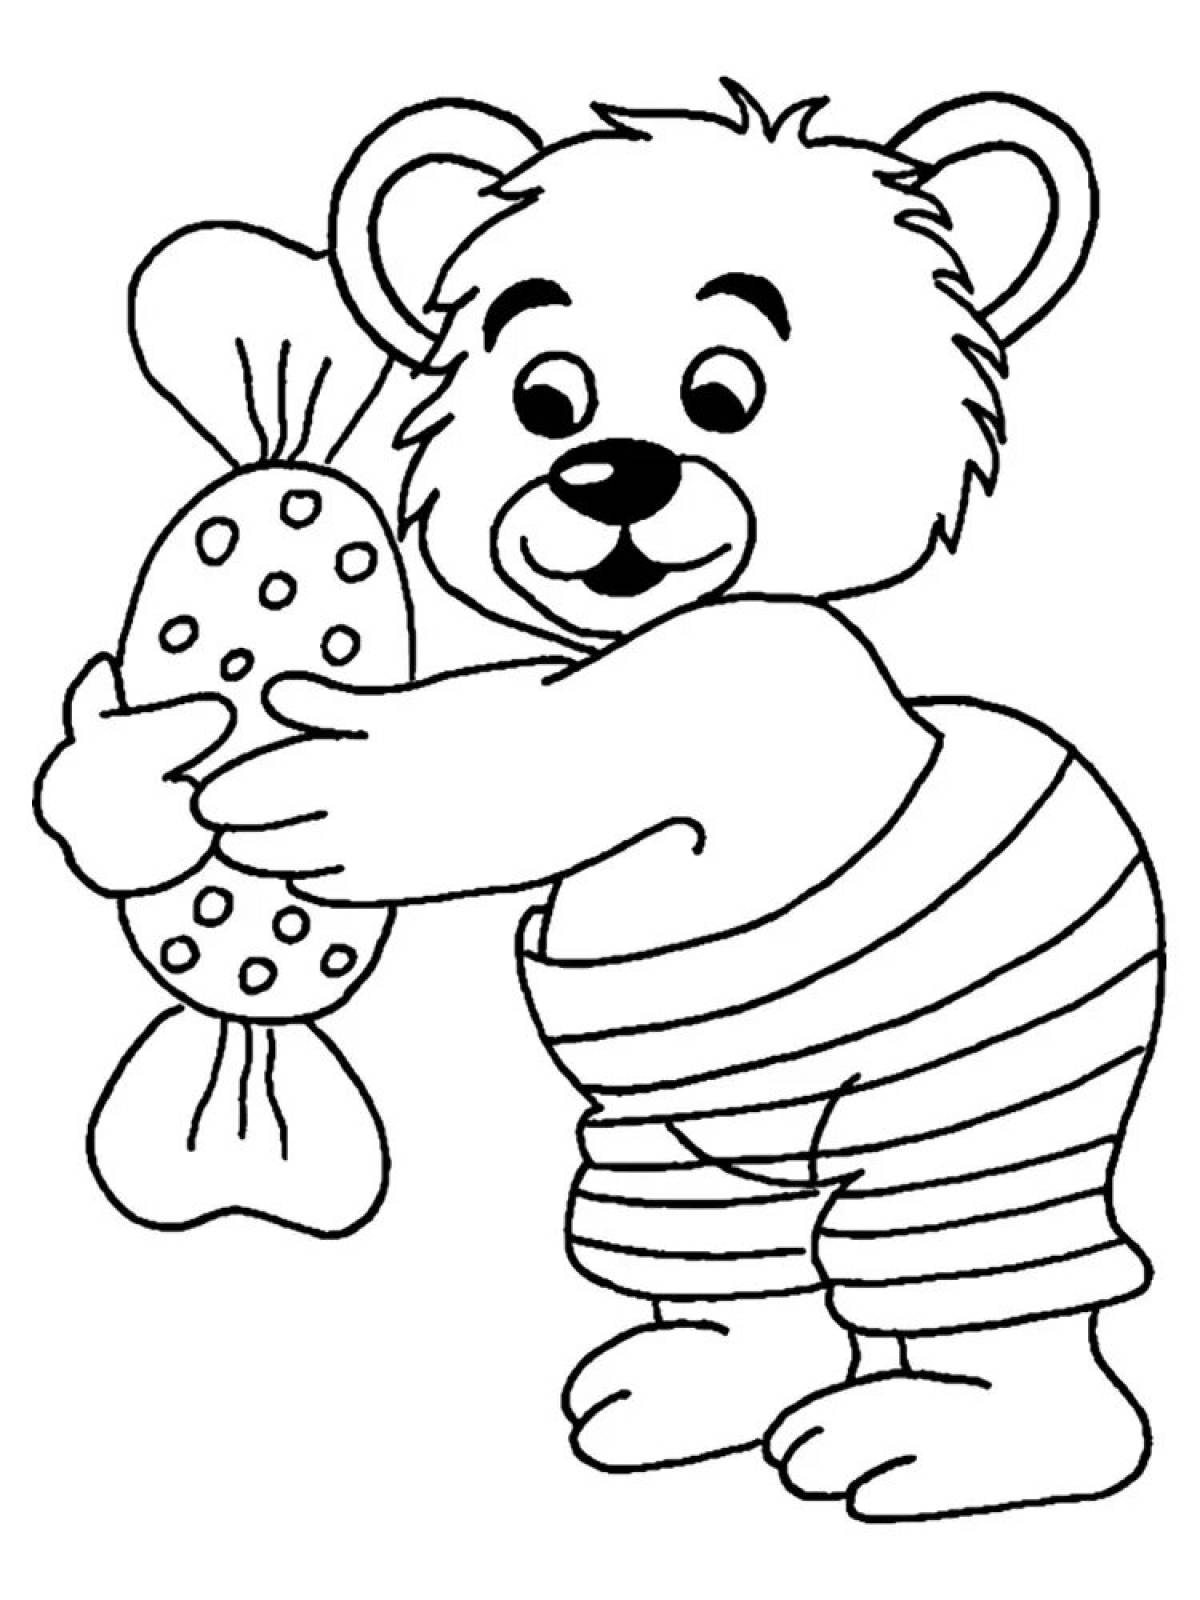 Printing coloring pages for kids #1